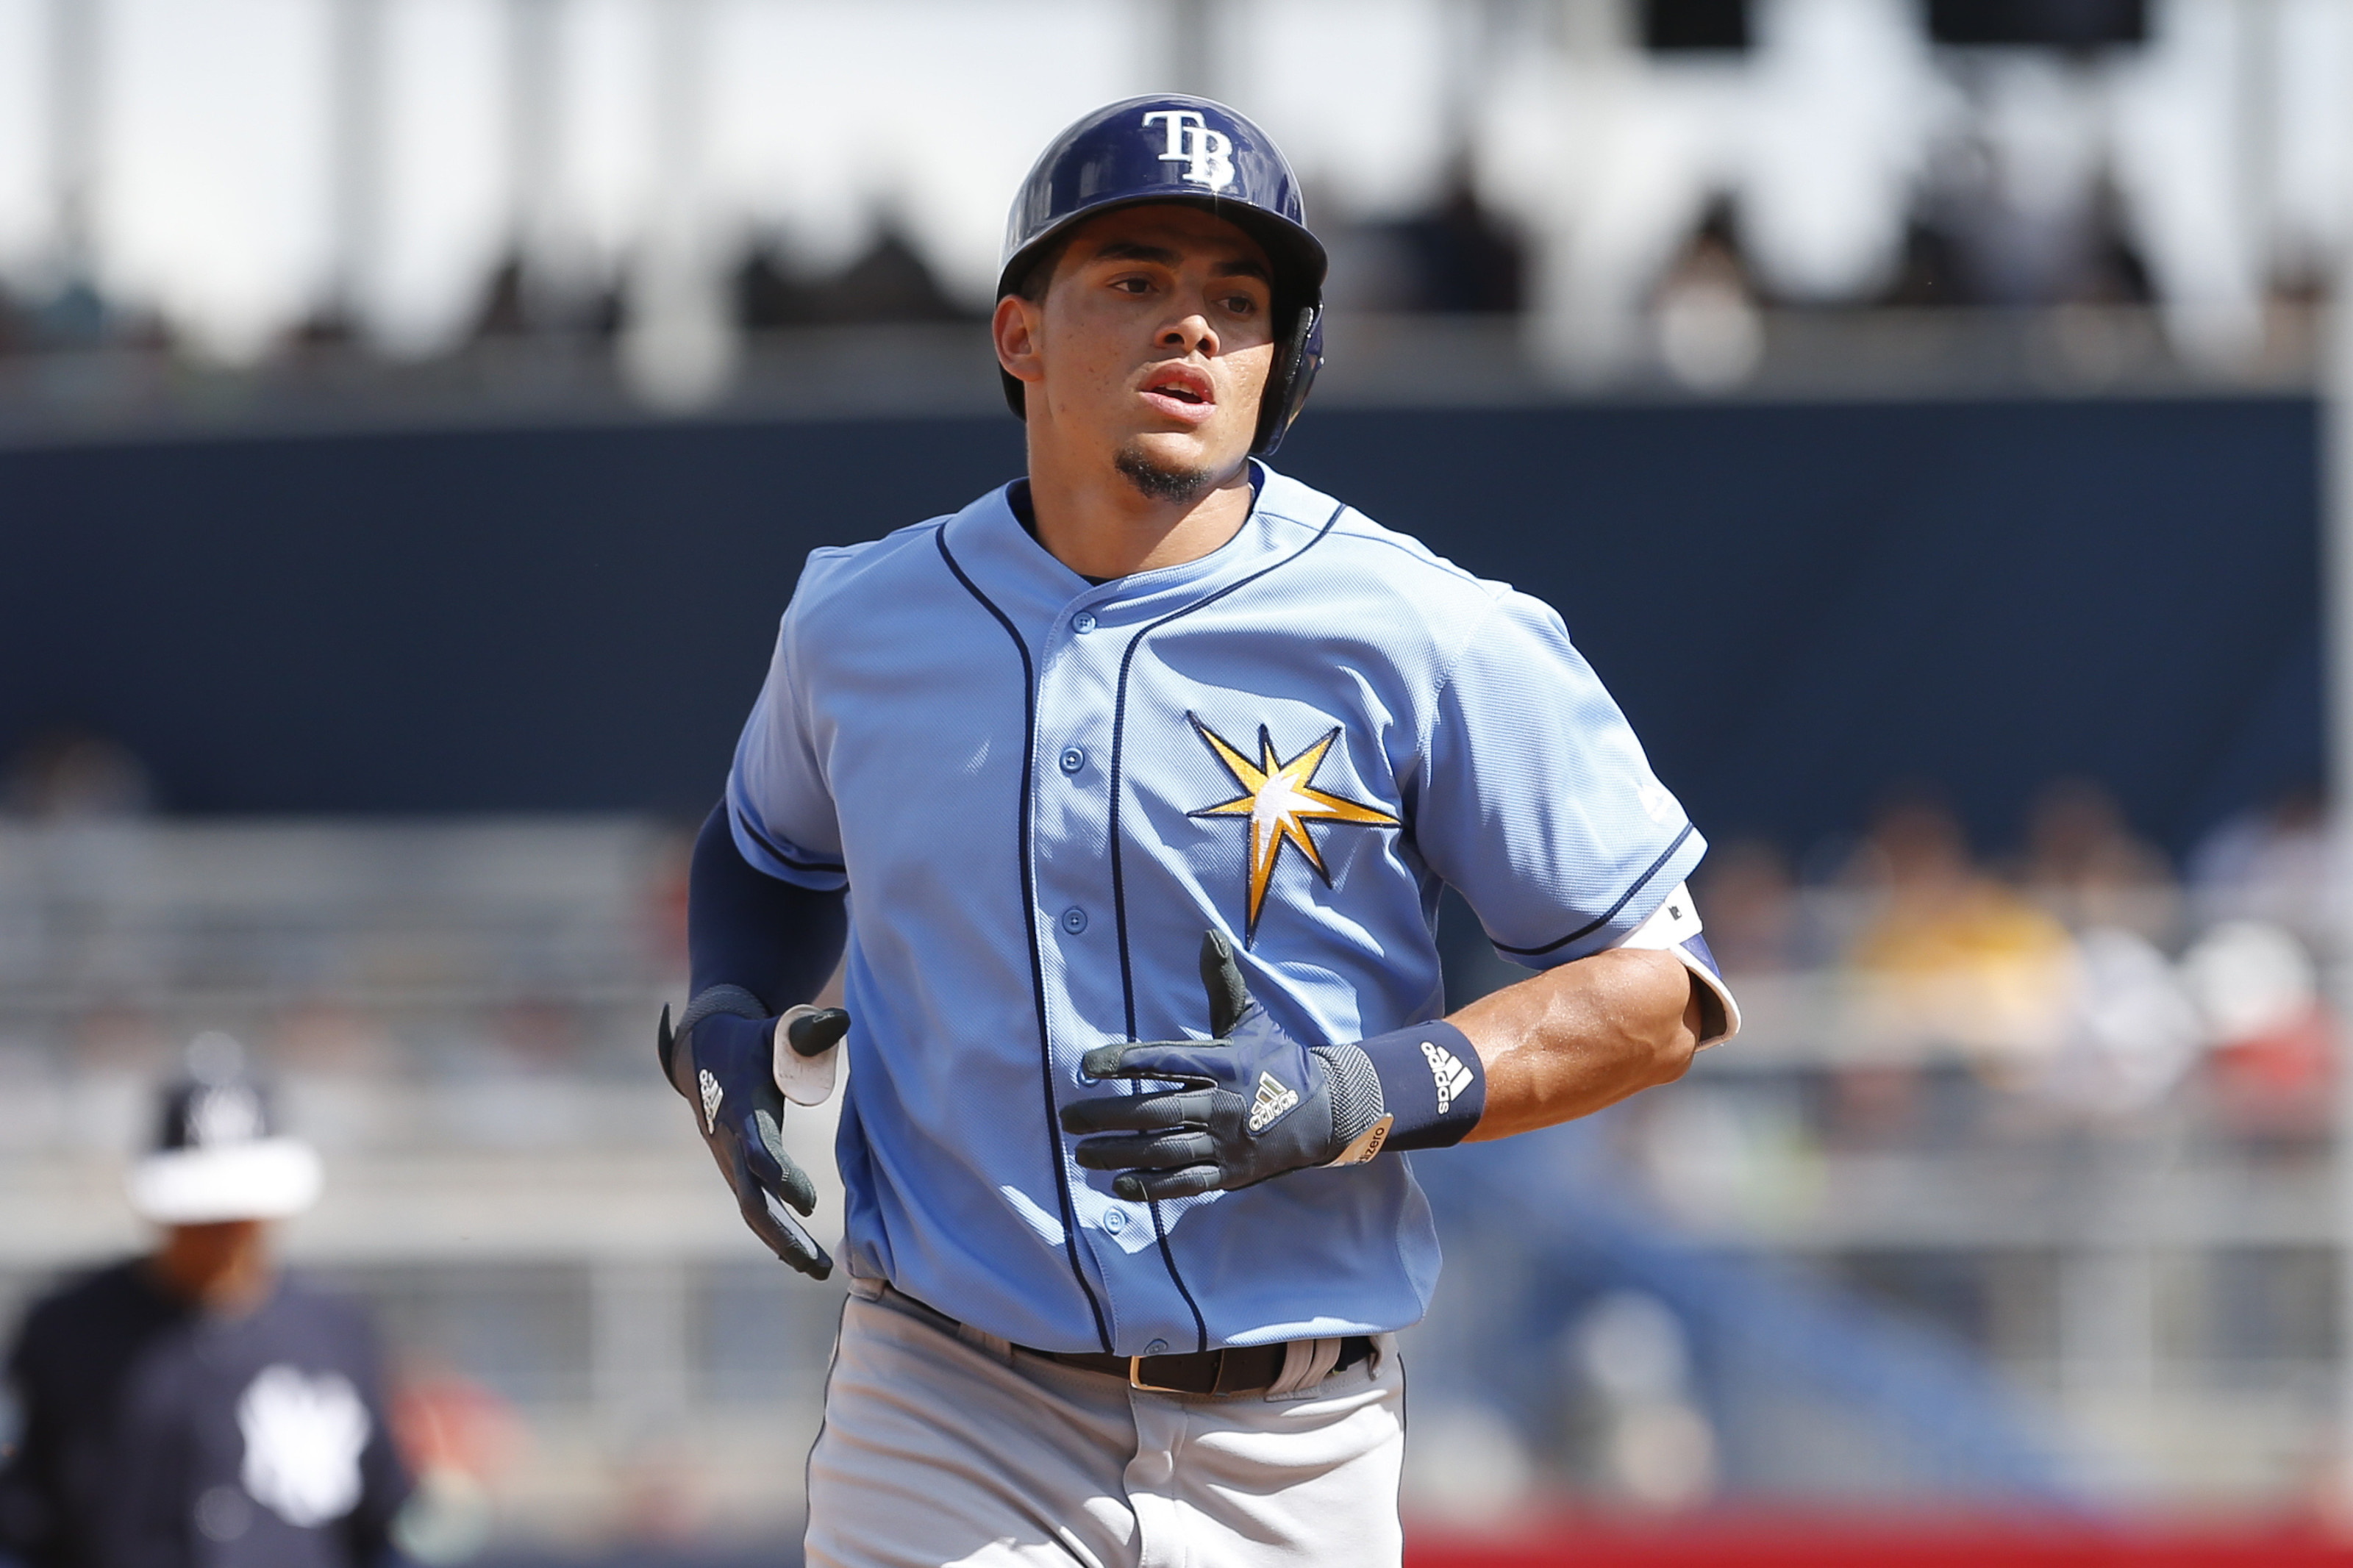 Tampa Bay Rays: Willy Adames time is coming but not here yet